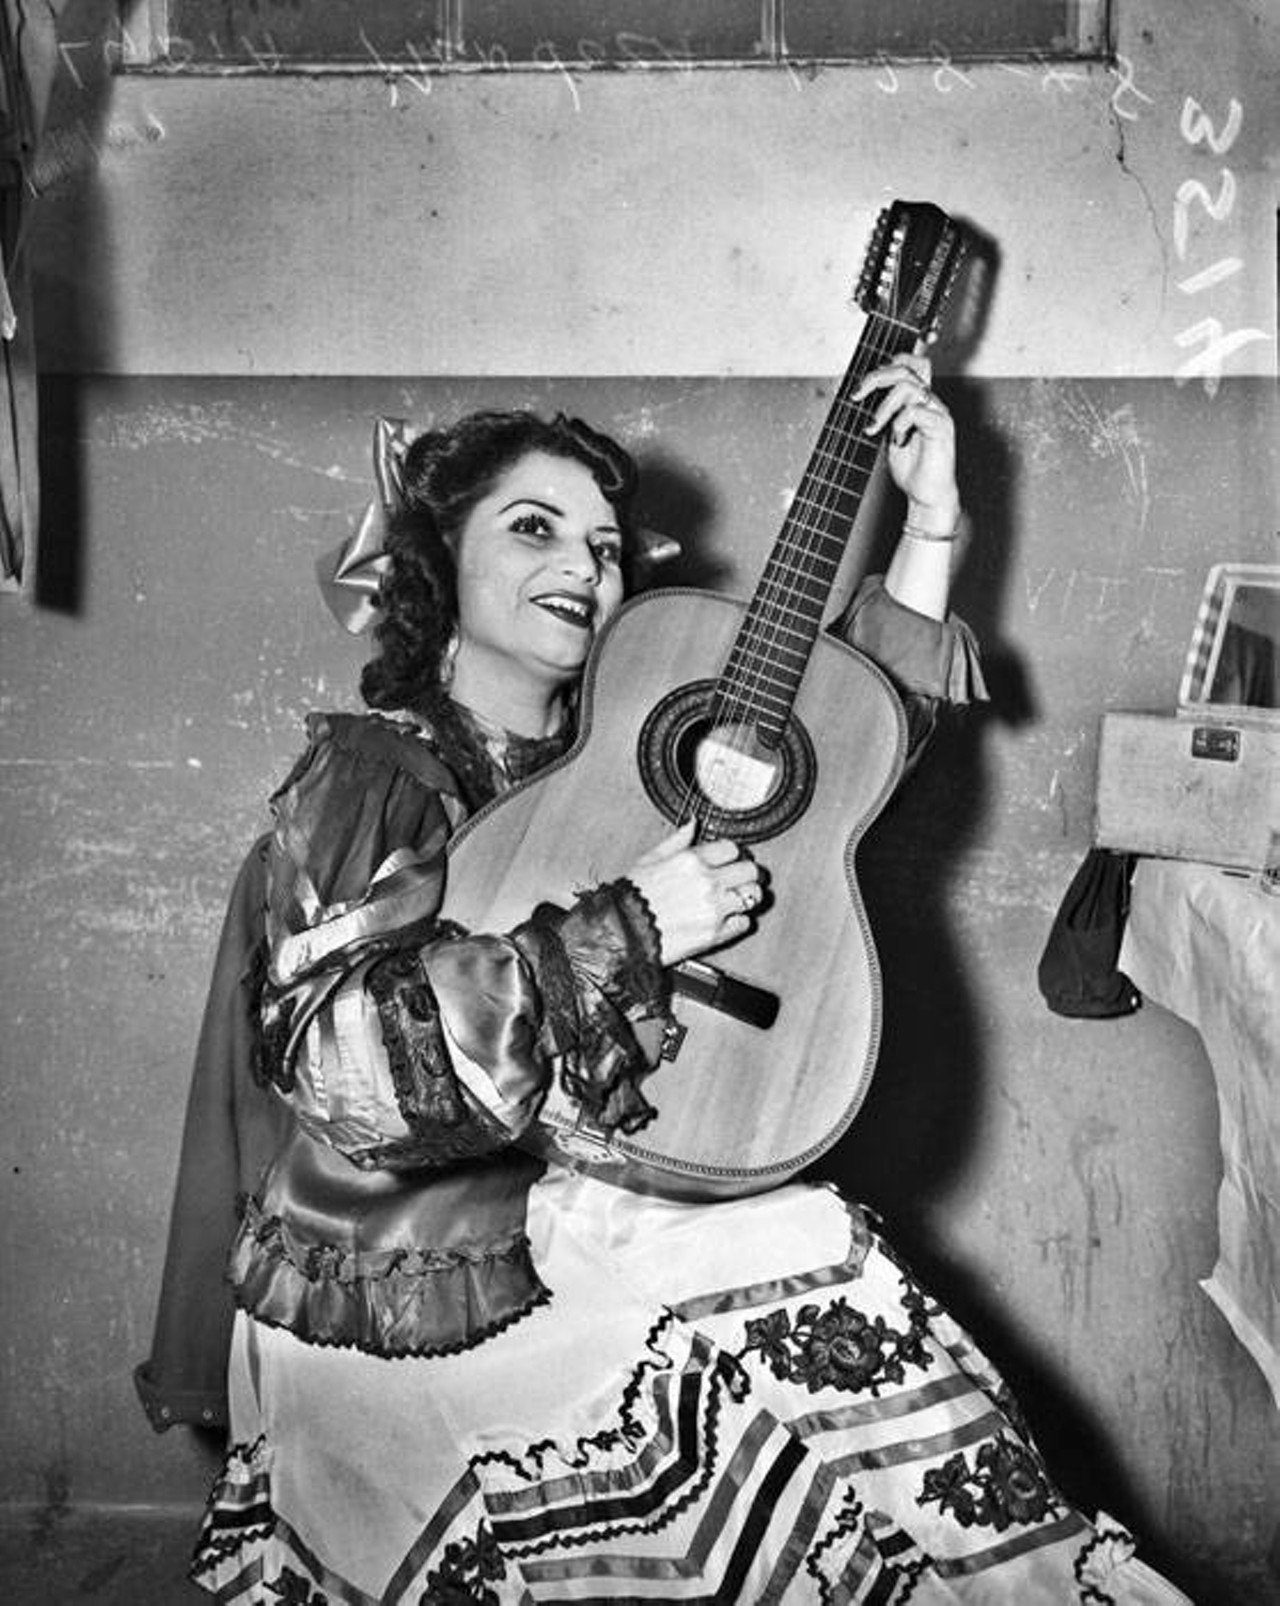 Lydia Mendoza
Singer, guitarrista and border babe, Lydia Mendoza was an early female Mexican-American music icon of her time. She learned to sing and play the guitar from the matriarchs of her family (so girl power!) and soon performed with the family band even though she was just a little girl. Over her lifetime, she would receive numerous awards for art, culture, and heritage. She passed away at the ripe old age of 91, most likely of plain old age, and is buried at the San Fernando Cemetery right here in San Antonio. Basically, she was a legend.
Photo via UTSA Libraries Digital Collections